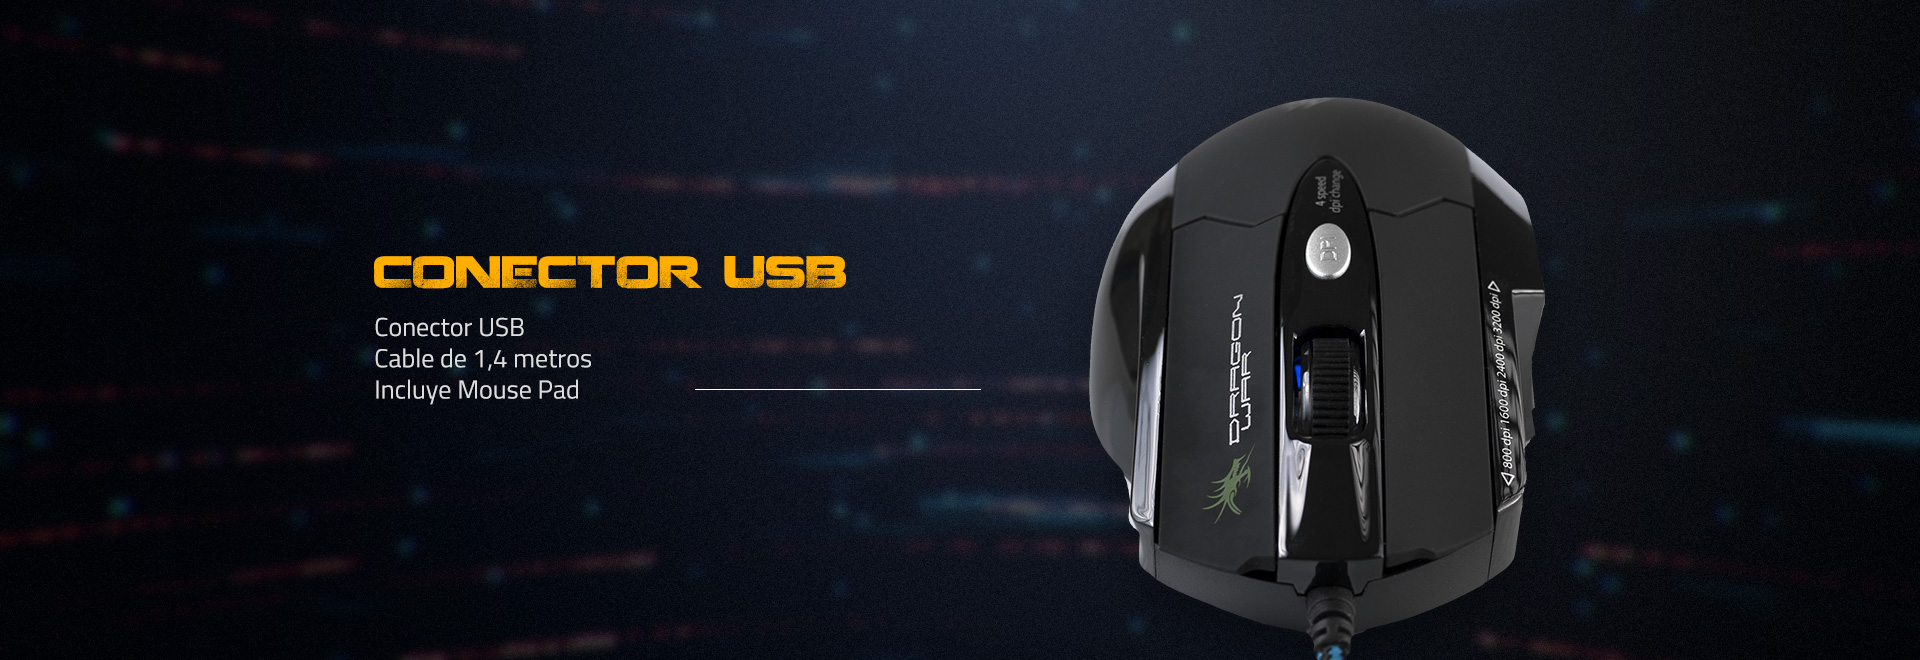 Leviathan 3200dpi Gaming Mouse - Flyer: 2